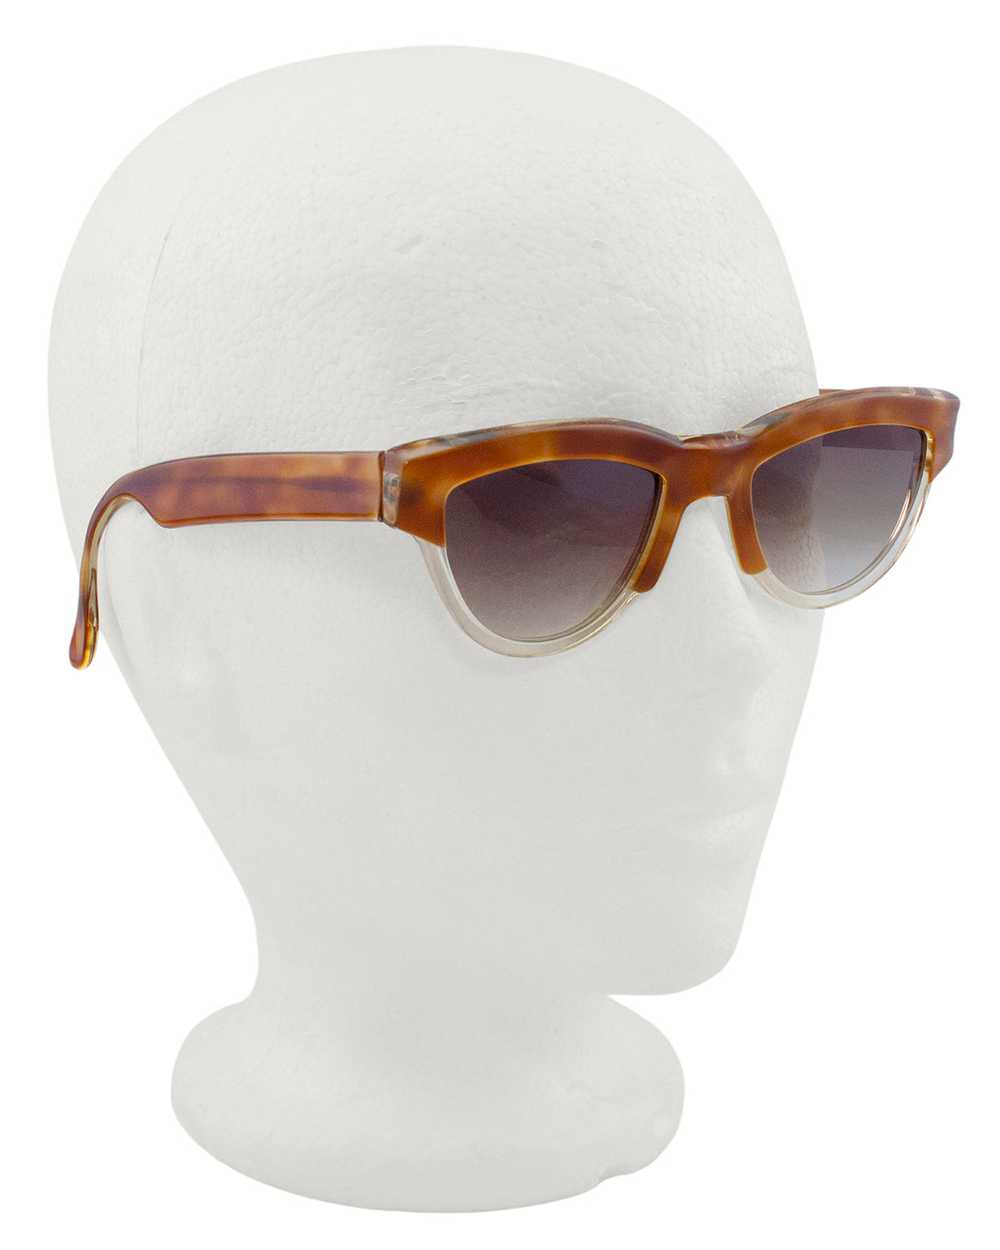 Alain Mikli Brown and Clear Sunglasses - image 1